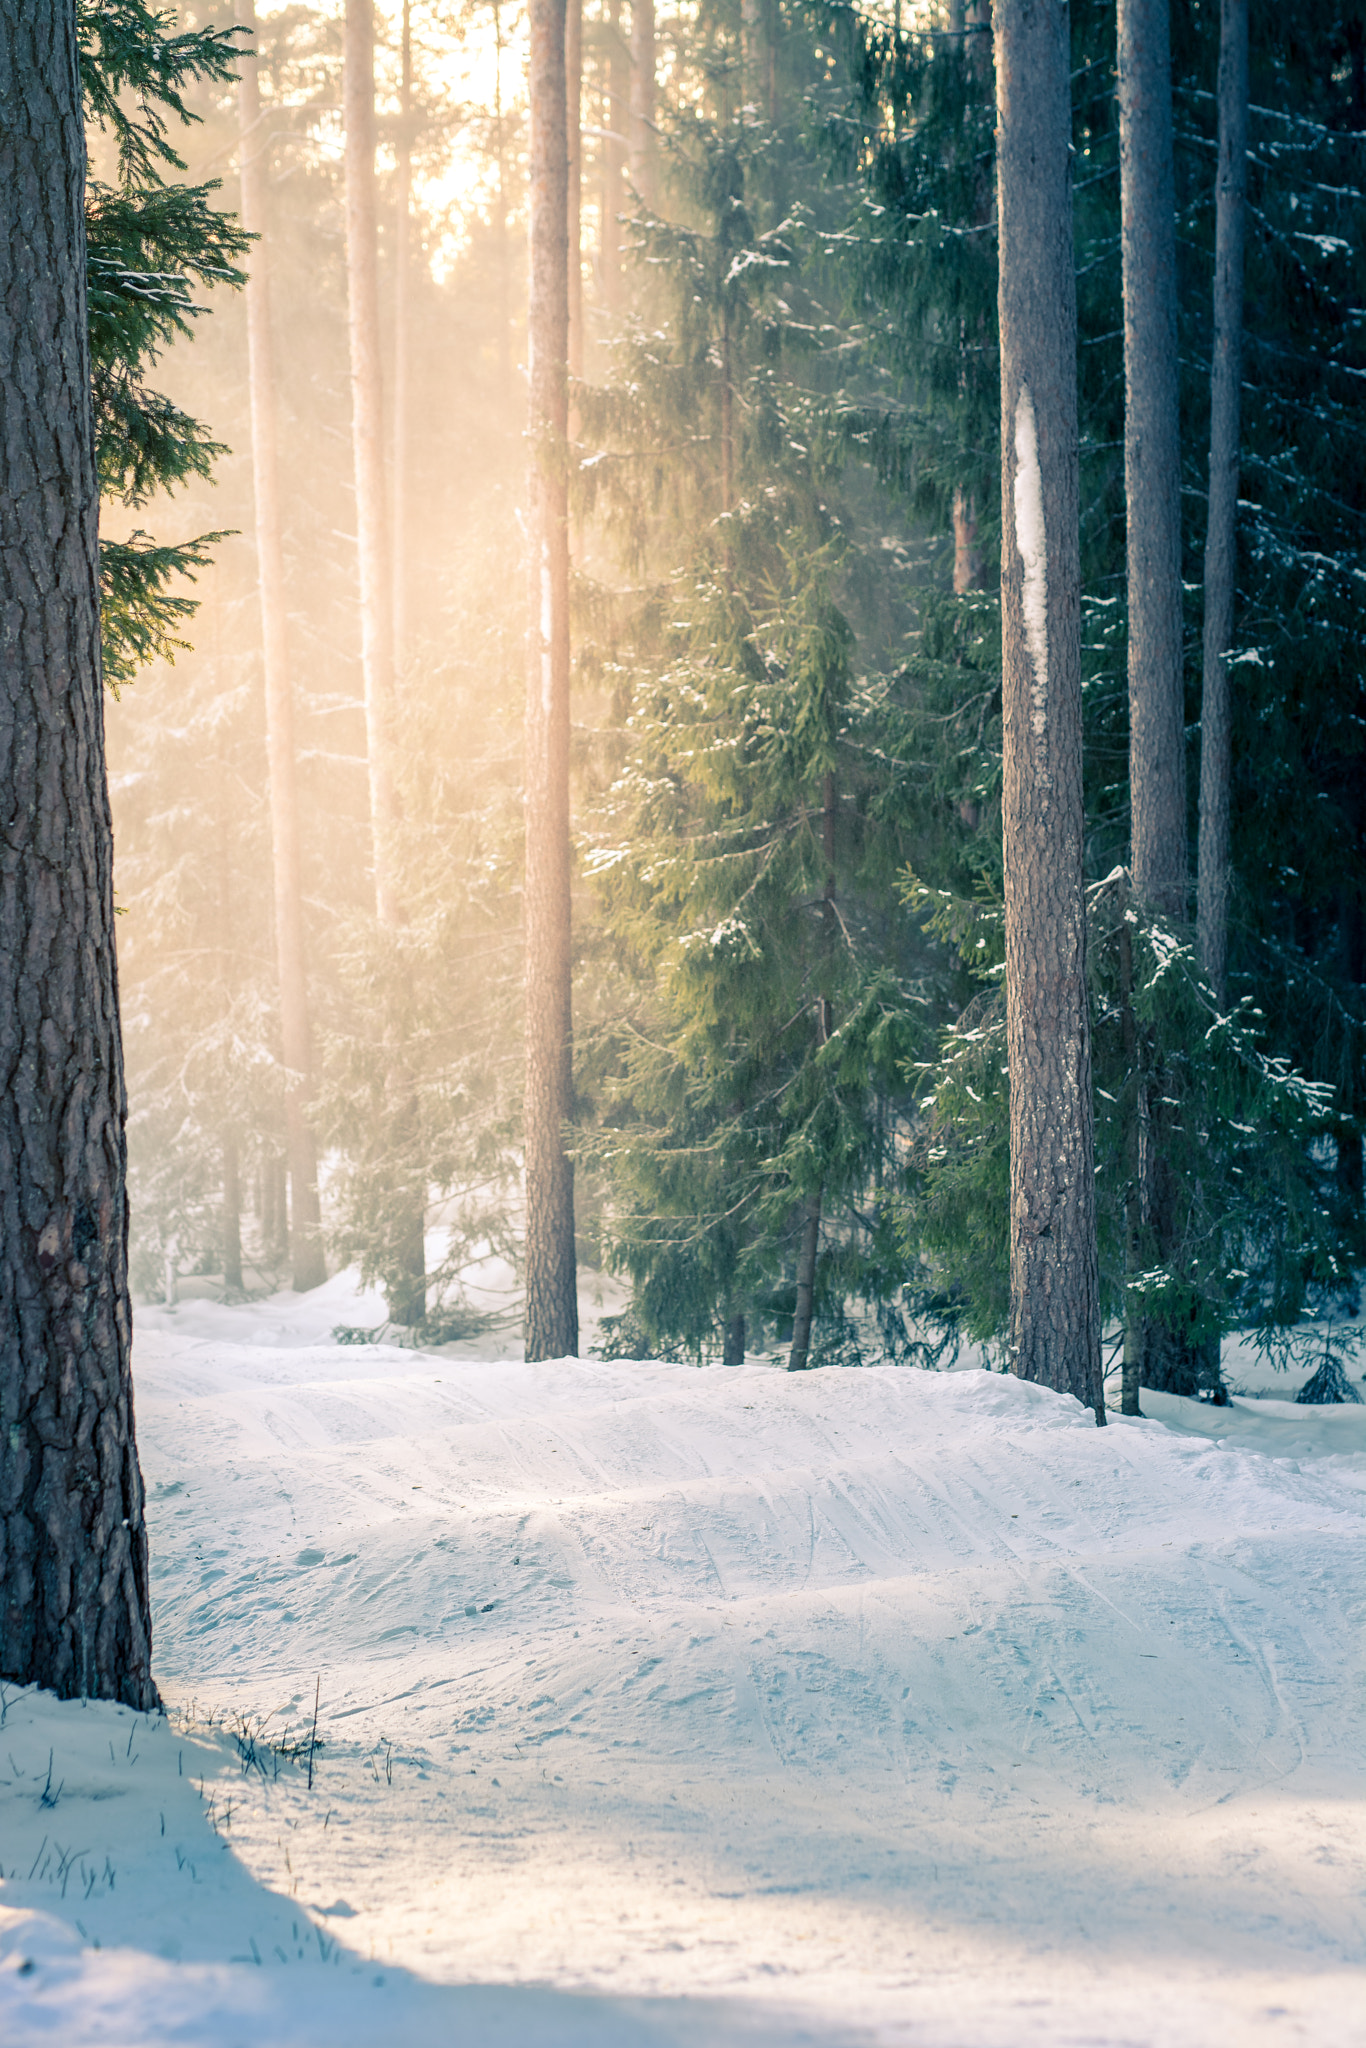 Nikon D5200 + Sigma 50mm F1.4 DG HSM Art sample photo. Riding on off-piste at sunset in snowy forest photography